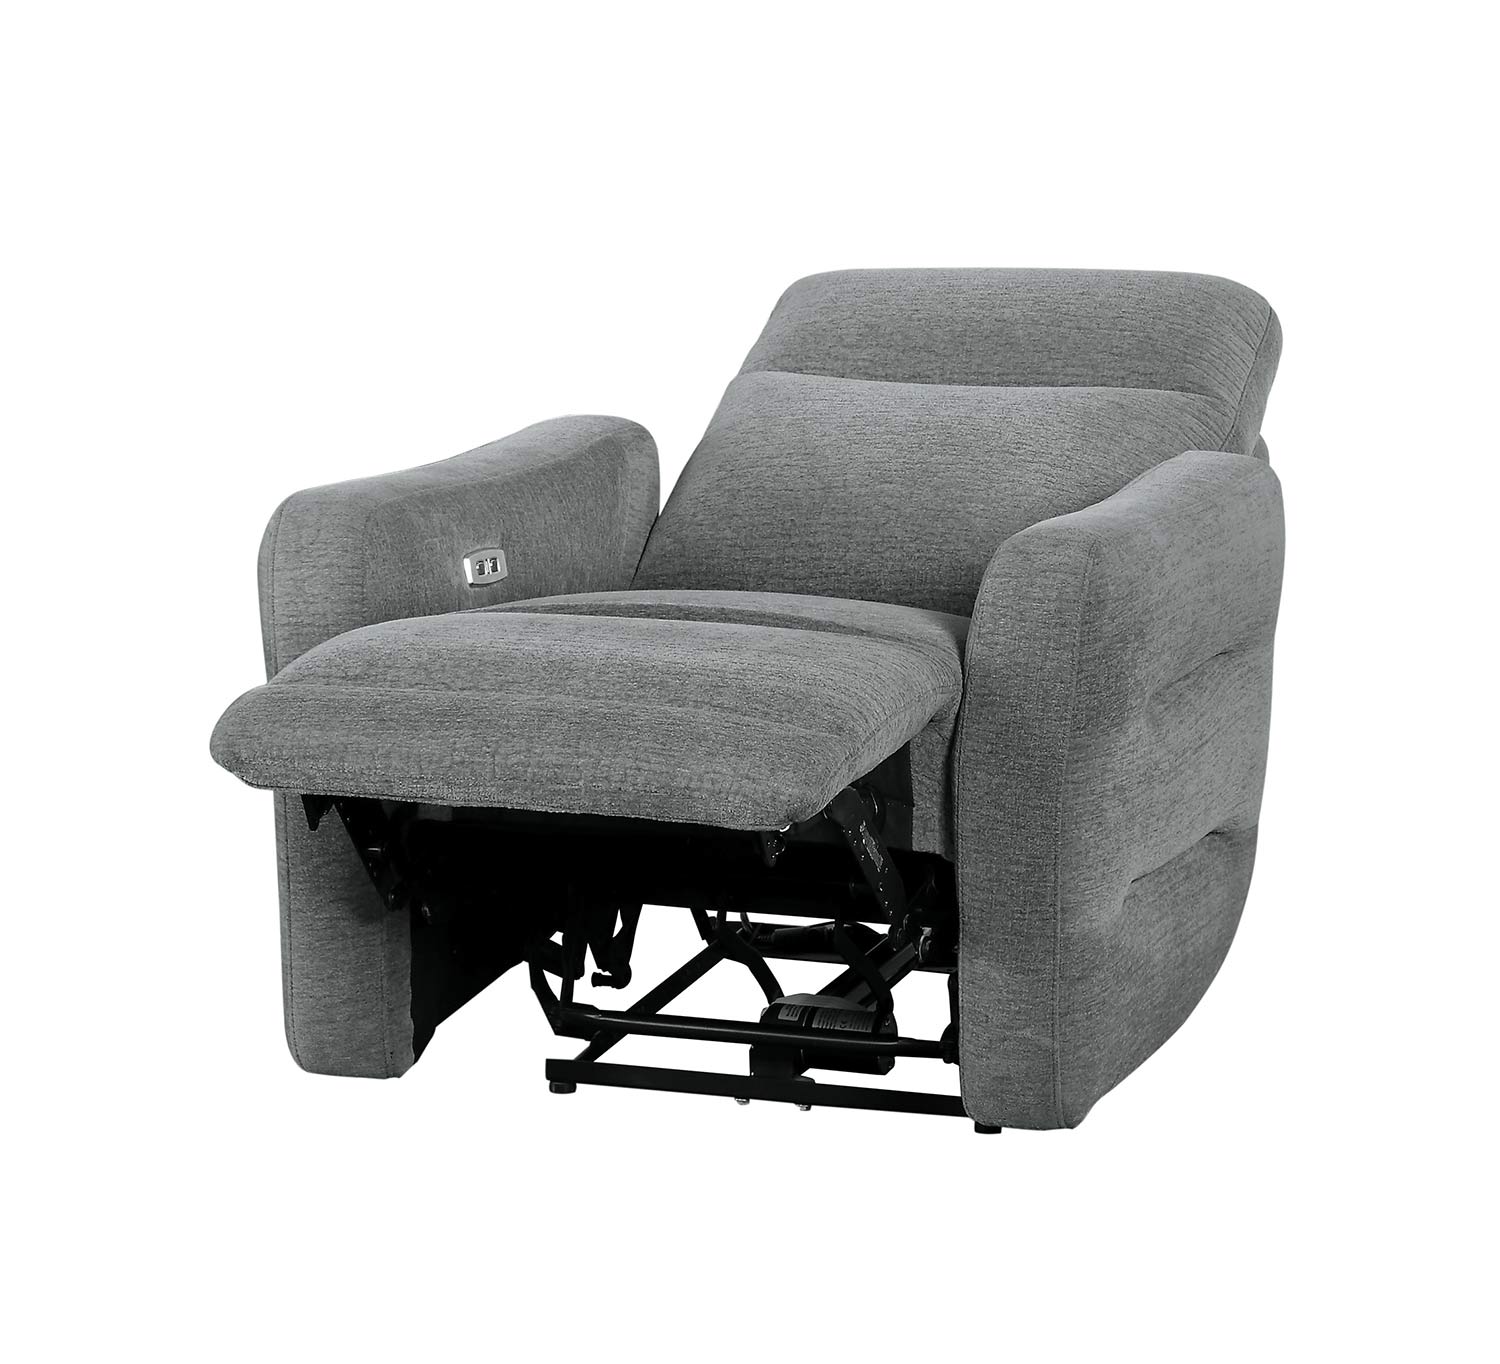 Homelegance Edition Power Lay Flat Reclining Chair with Power Headrest - Dove